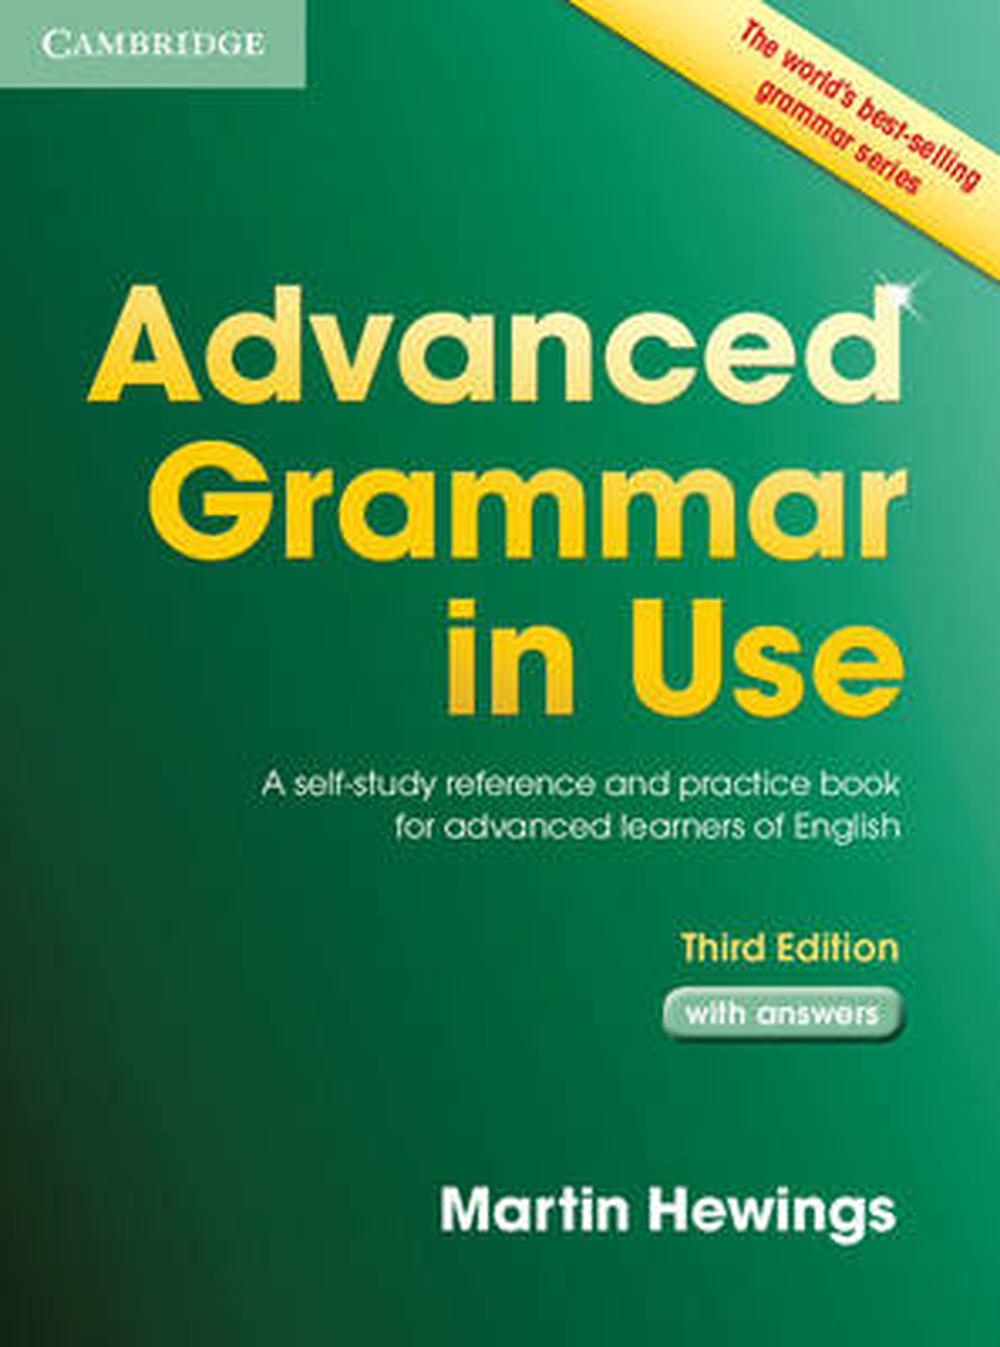 Answers　9781107697386　Hewings,　The　Grammar　Use　by　at　Book　with　online　Martin　Buy　Paperback,　Nile　Advanced　in